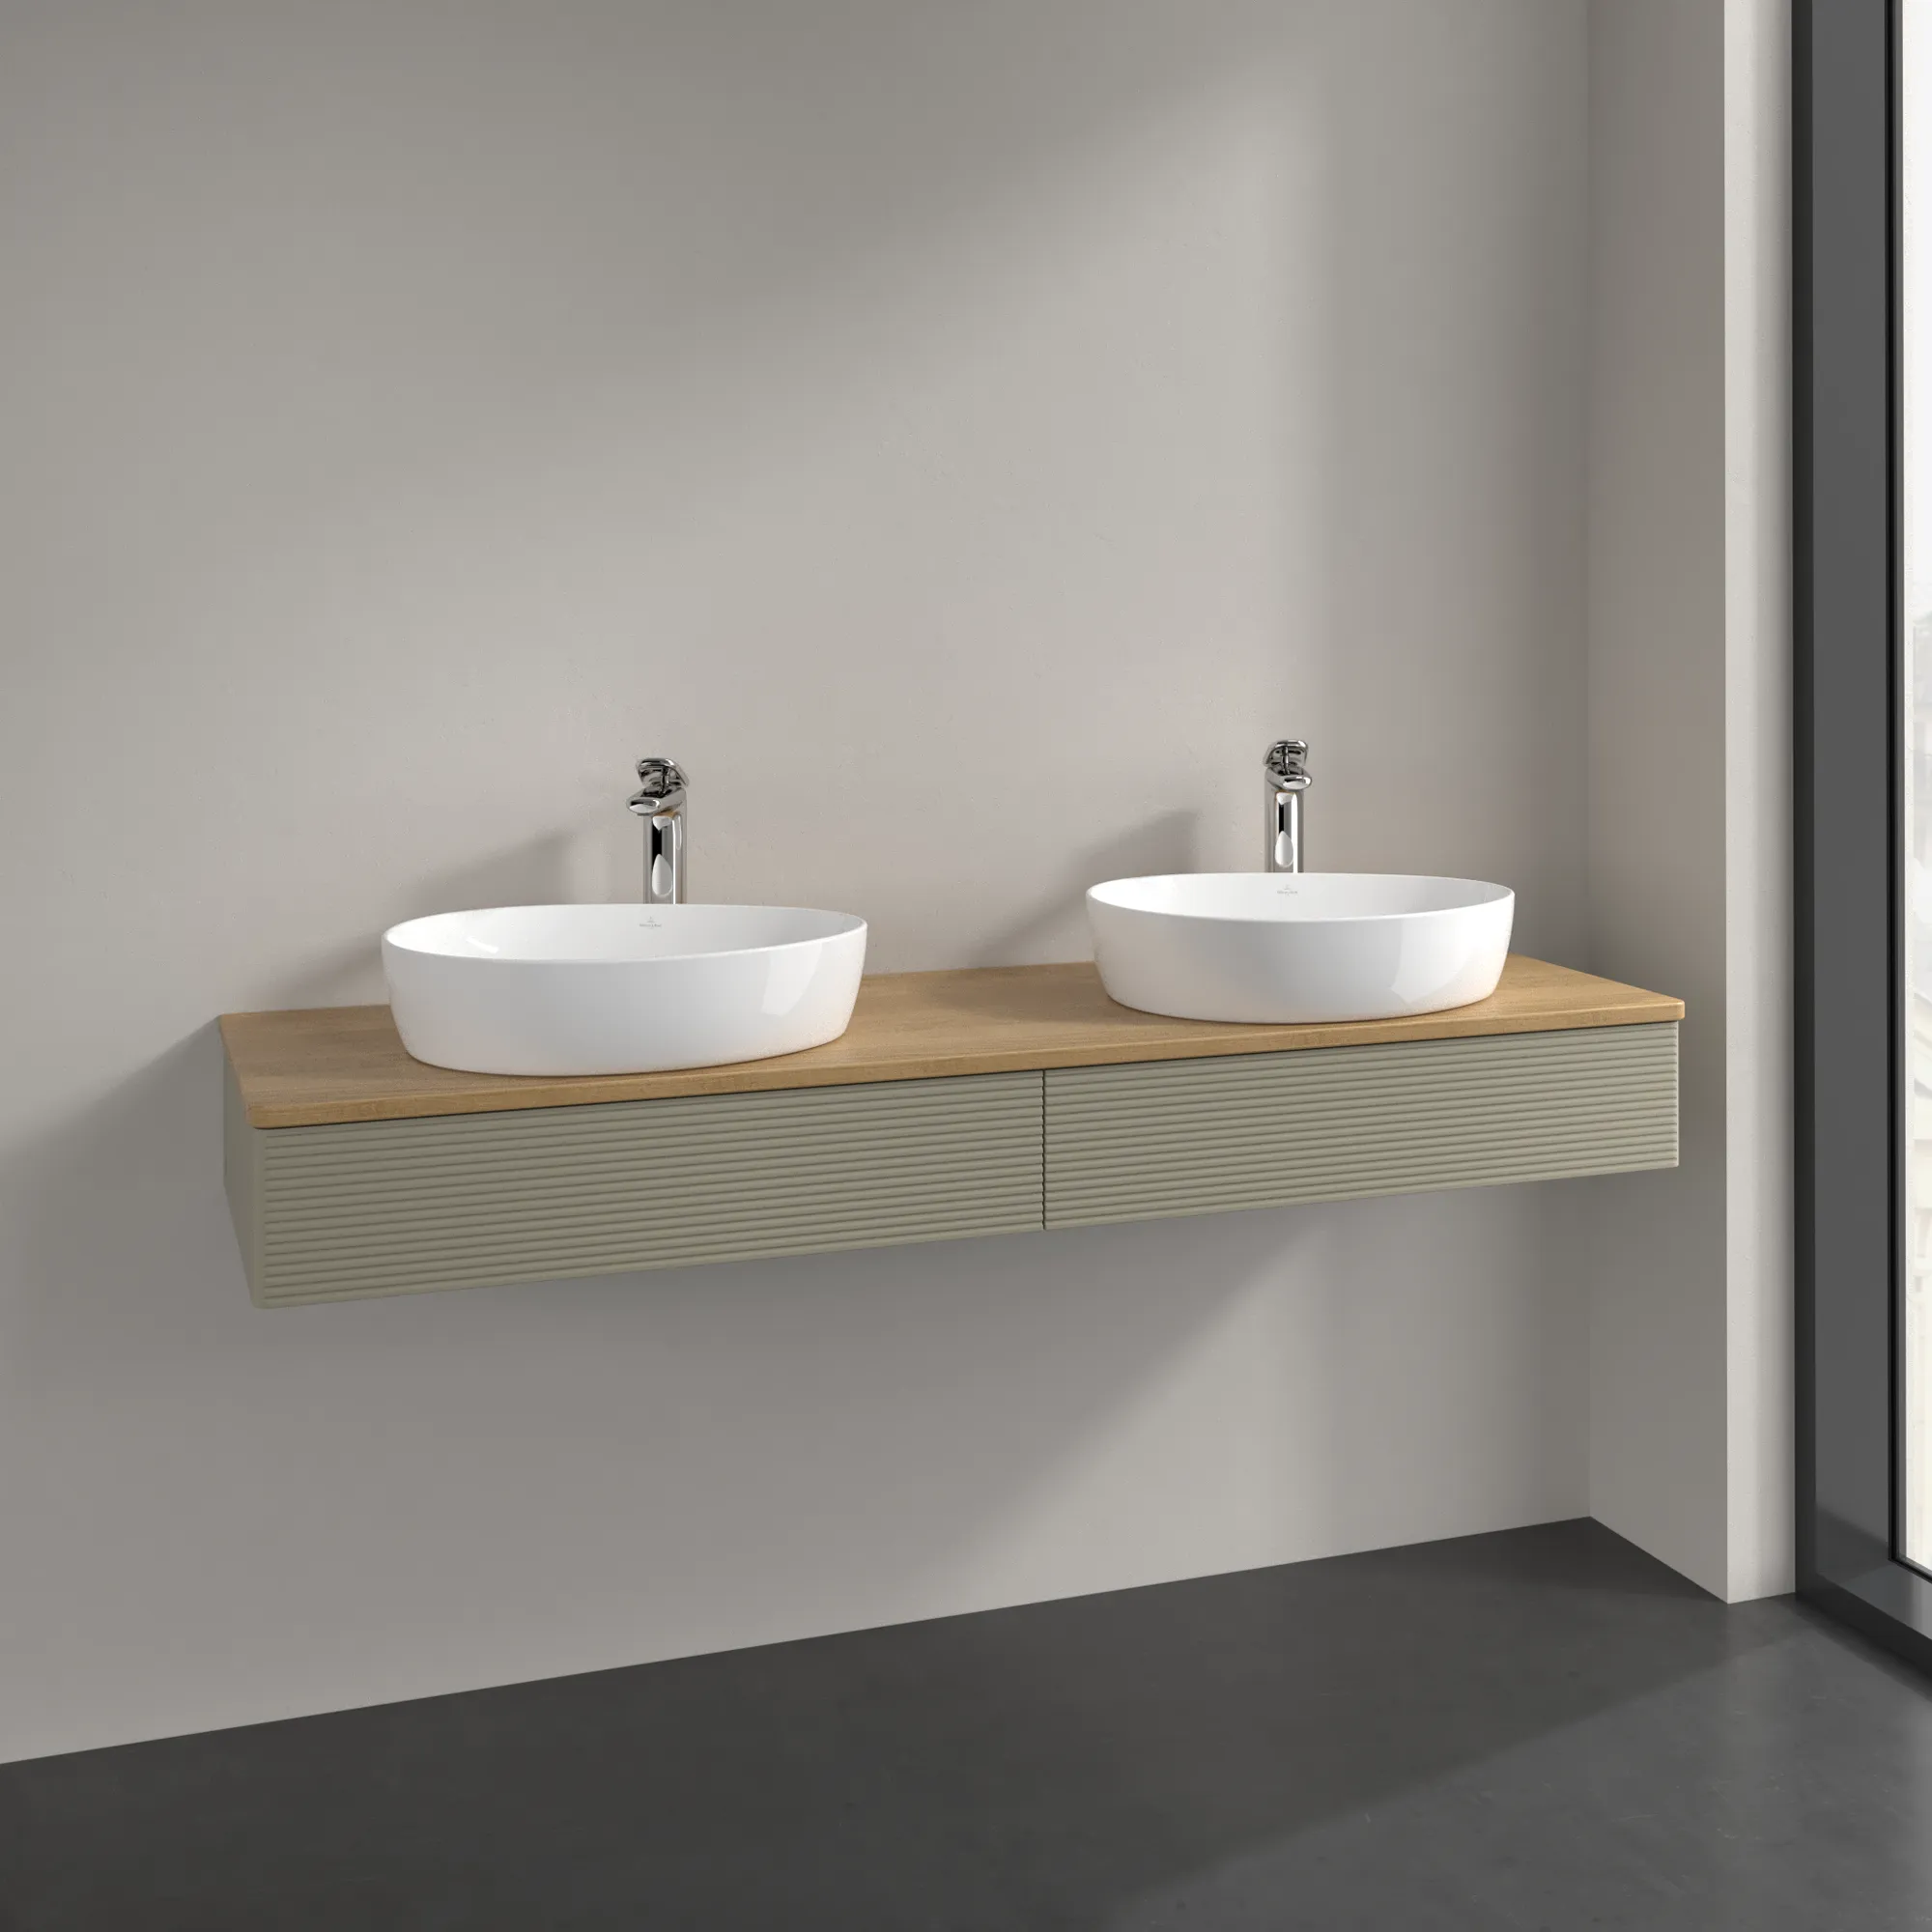 VILLEROY BOCH Antao Vanity unit, 2 pull-out compartments, 1600 x 190 x 500 mm, Front with grain texture, Stone Grey Matt Lacquer / Honey Oak #K17151HK resmi